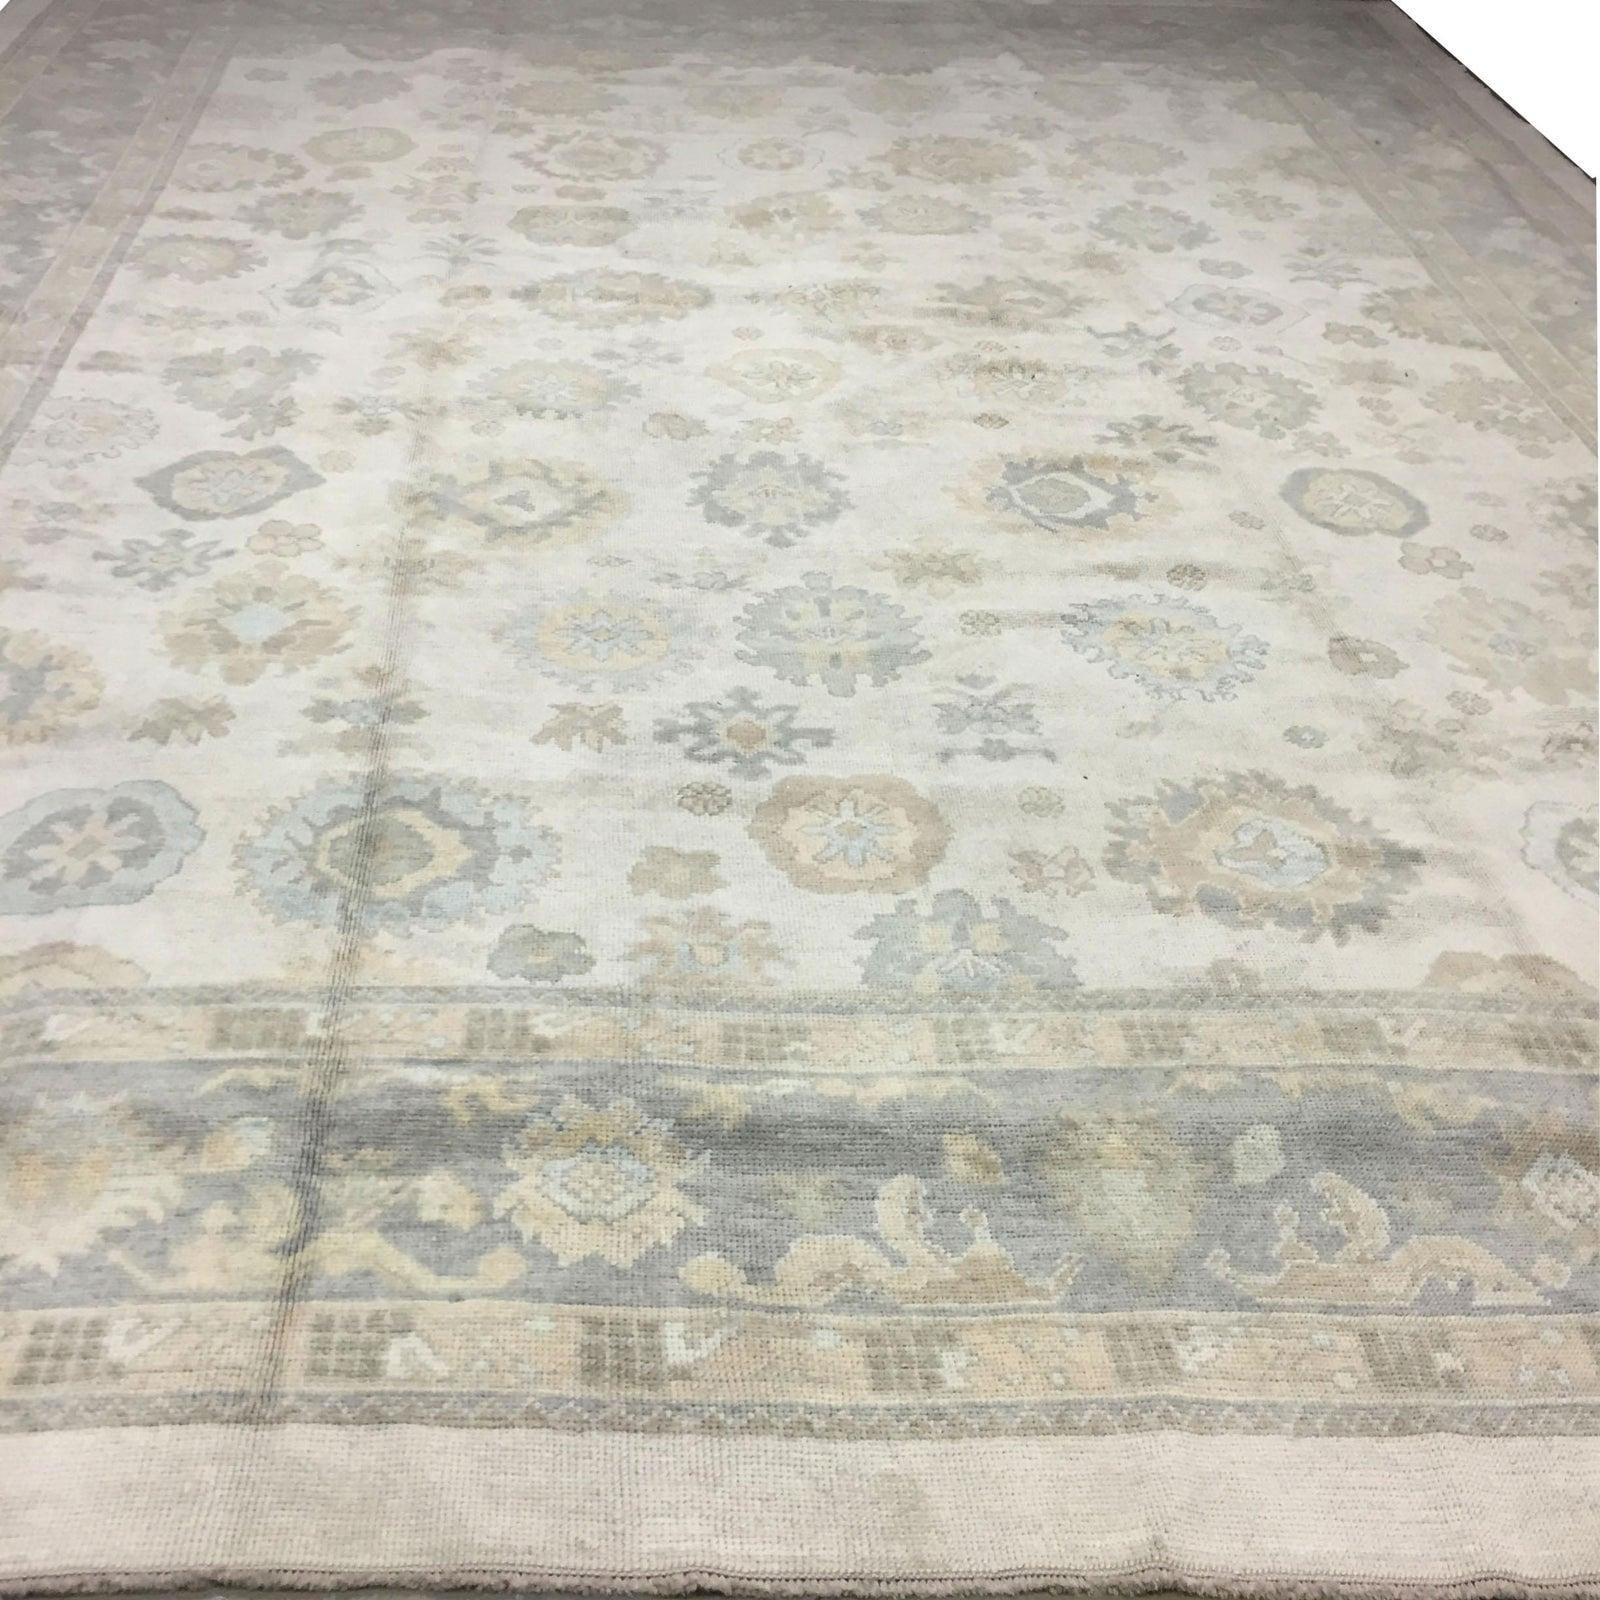 Reproduction Oushak Wool Rug 13' x 17' For Sale 4